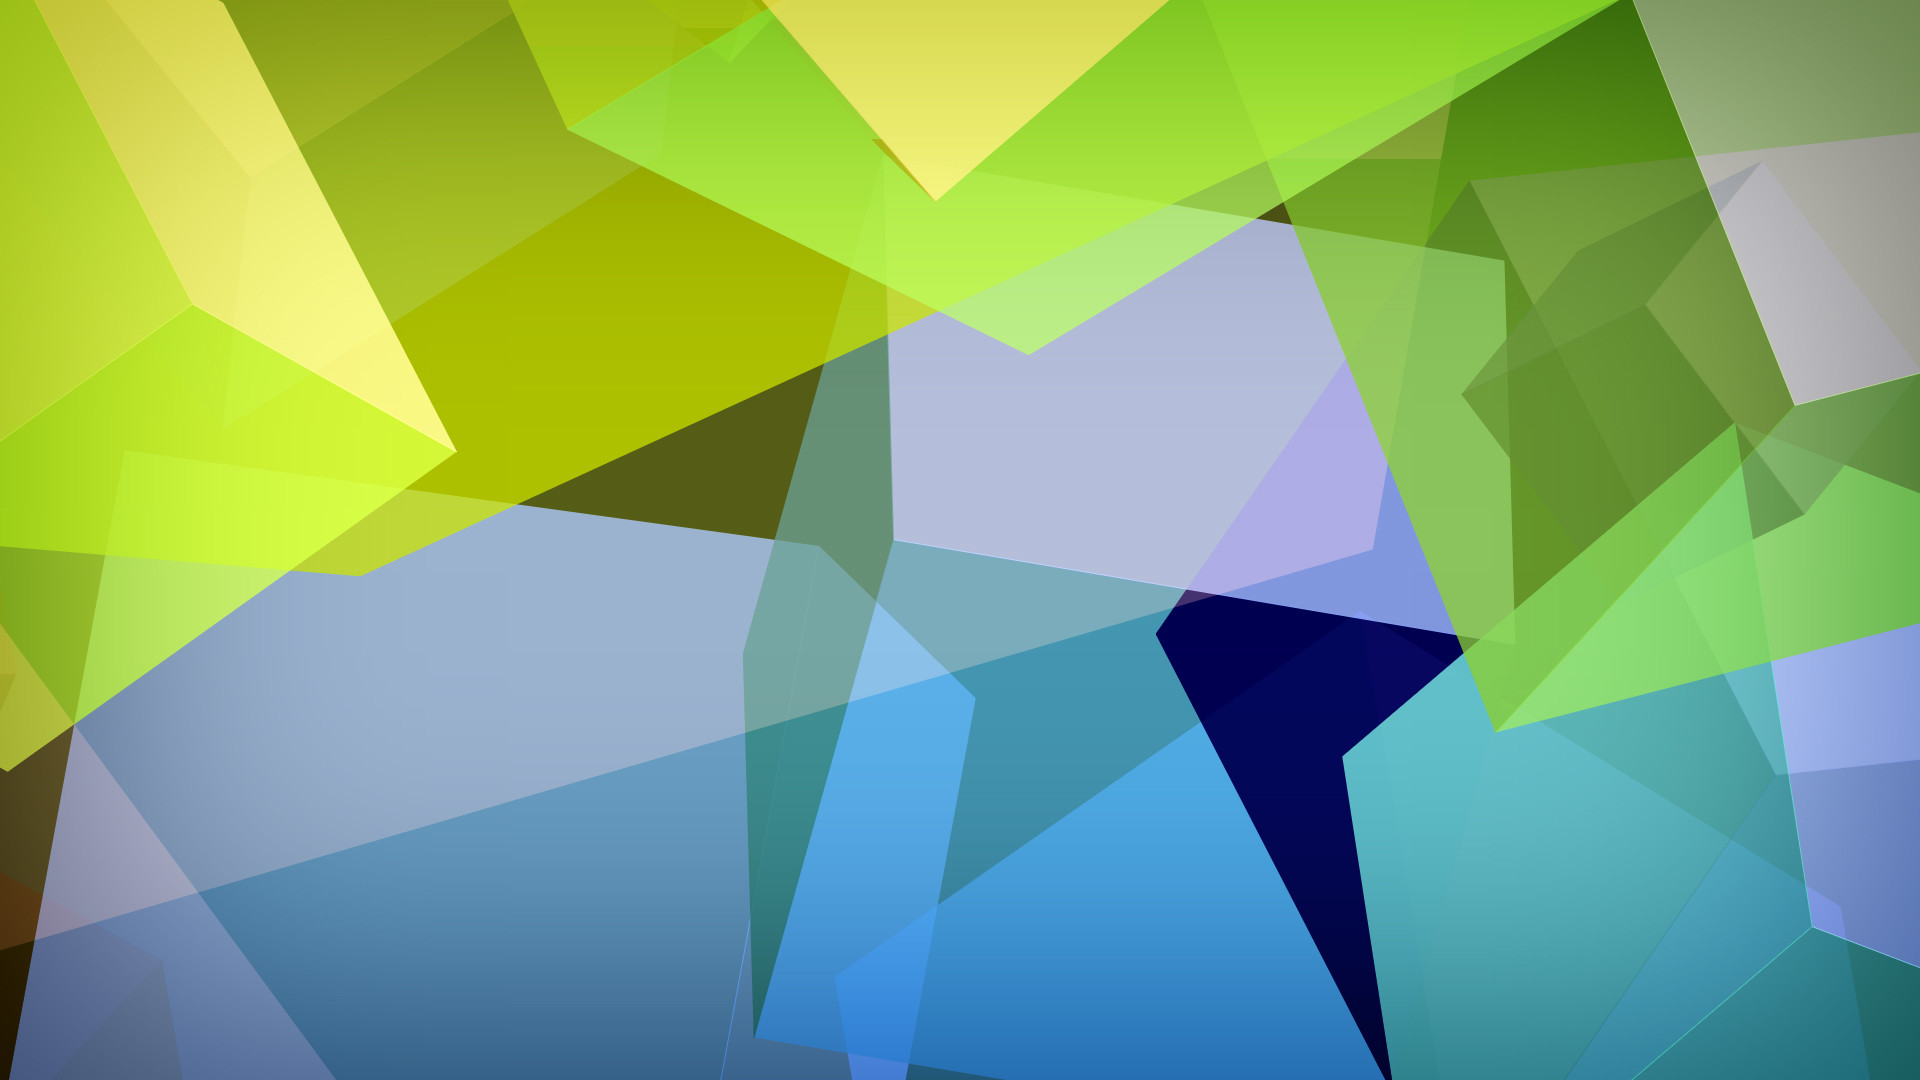 abstract-wallpapers-shapes-colored-geometric-wallpaper.jpg